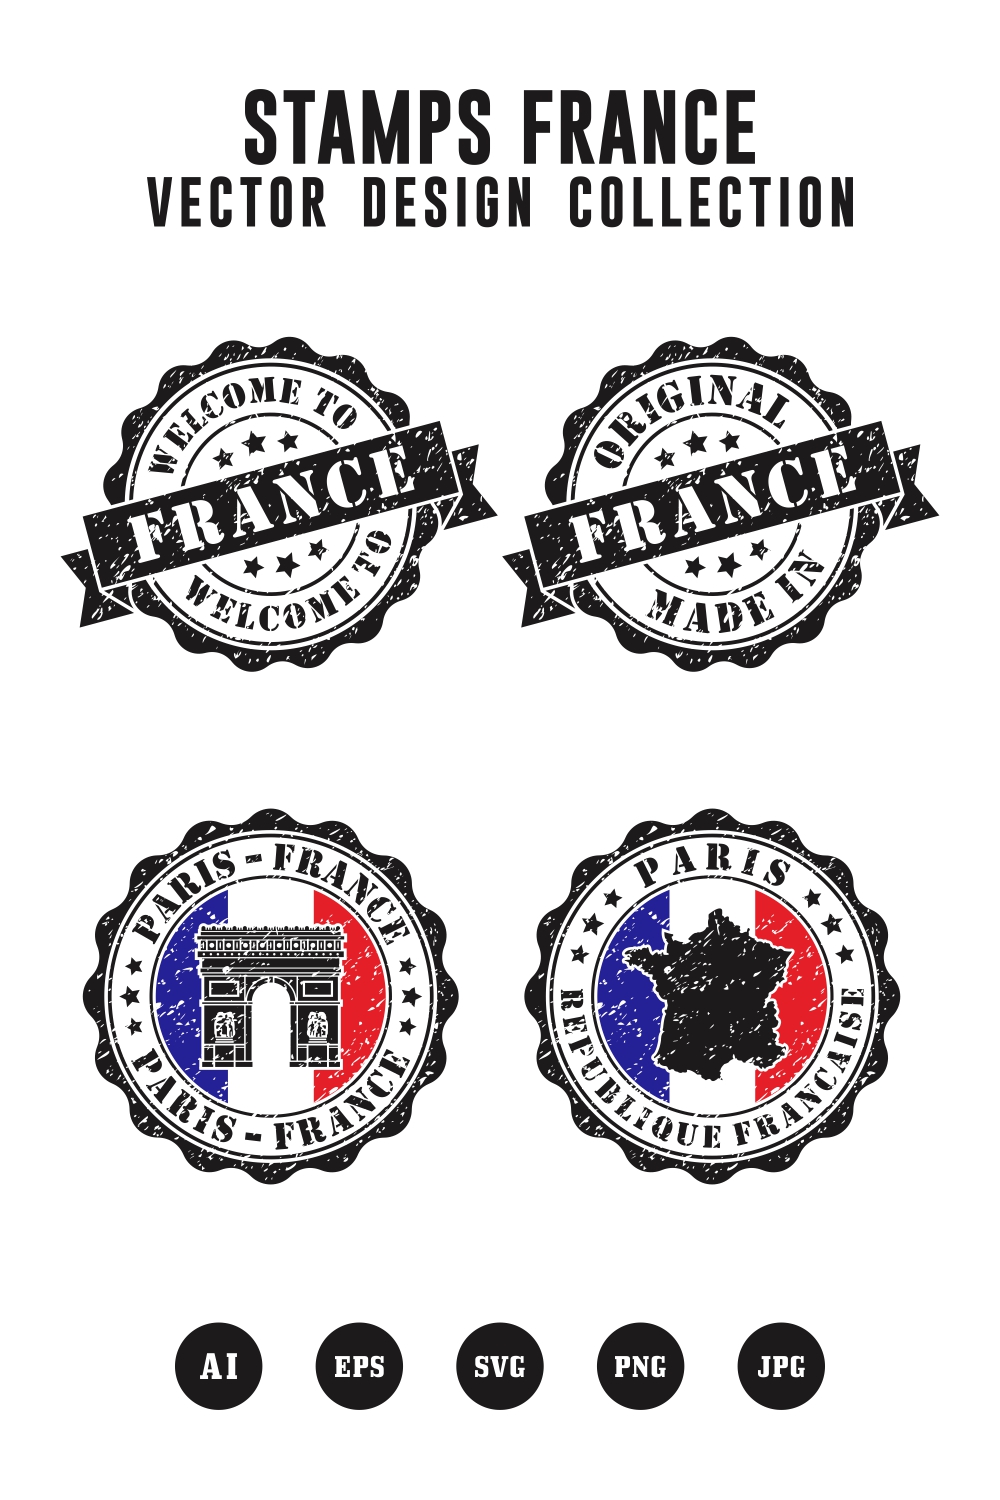 welcome to paris france vector stamps logo collection - $4 pinterest preview image.